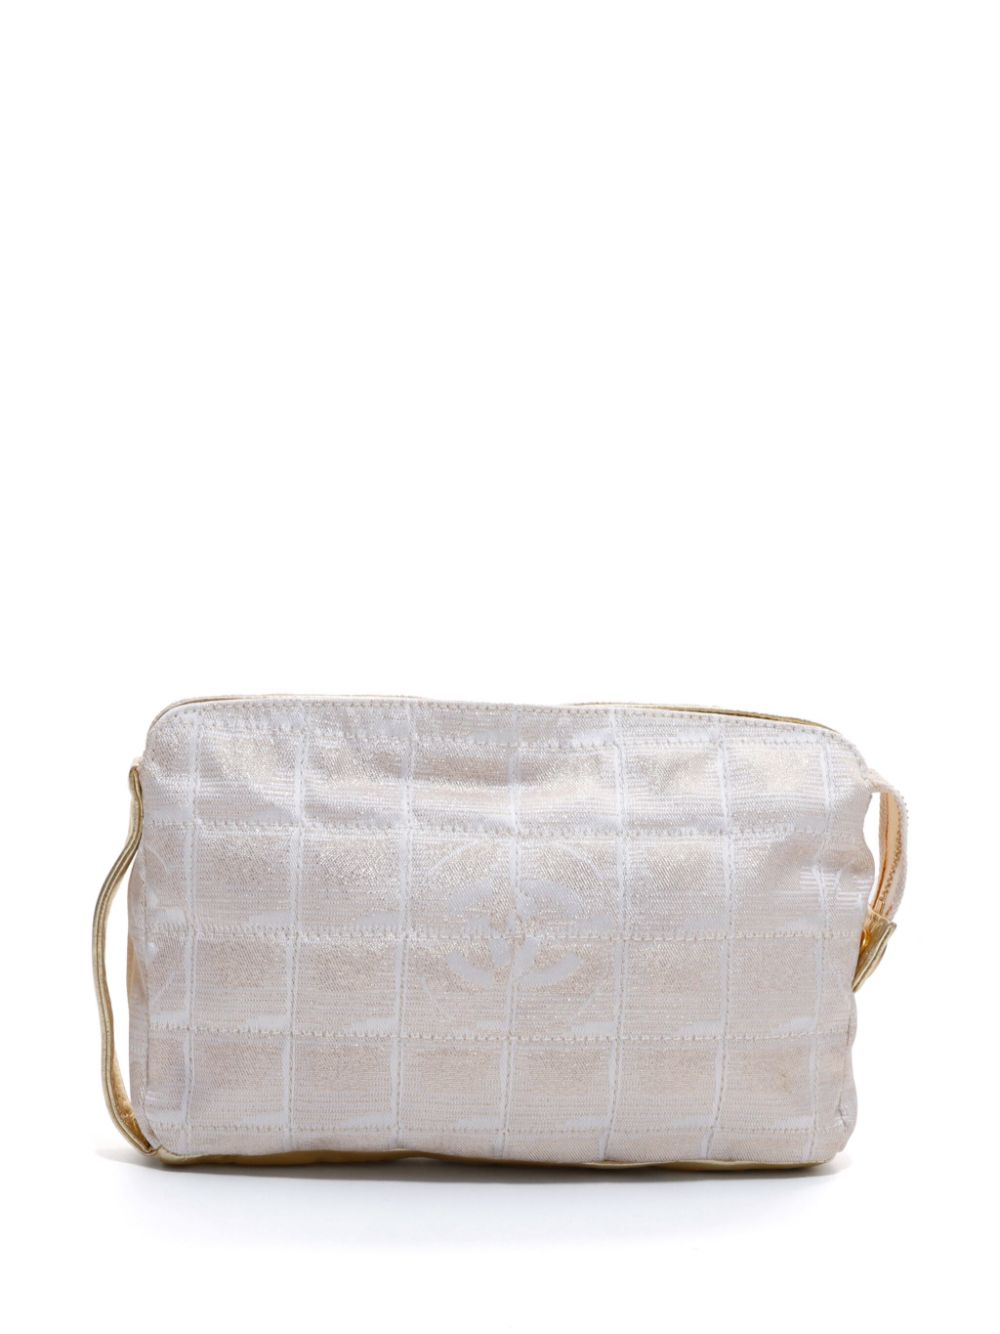 CHANEL Pre-Owned 2000-2001 Travel Line Clutch - Nude